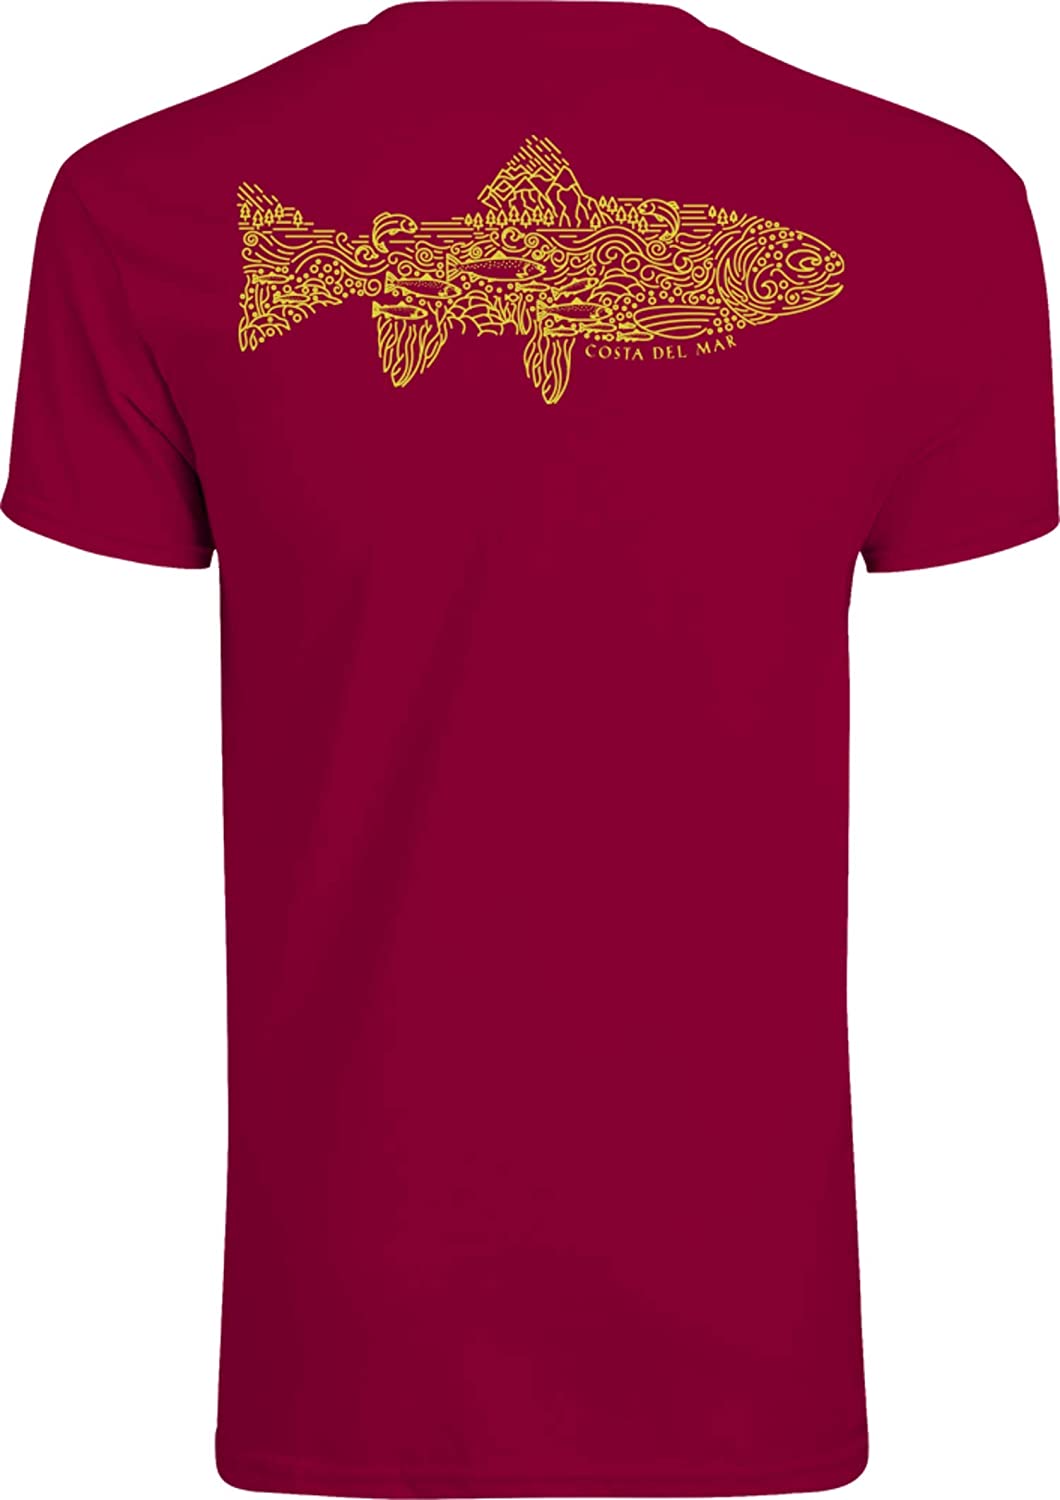 Costa Del Mar Montage Trout Tee Cardinal Red XX-Large